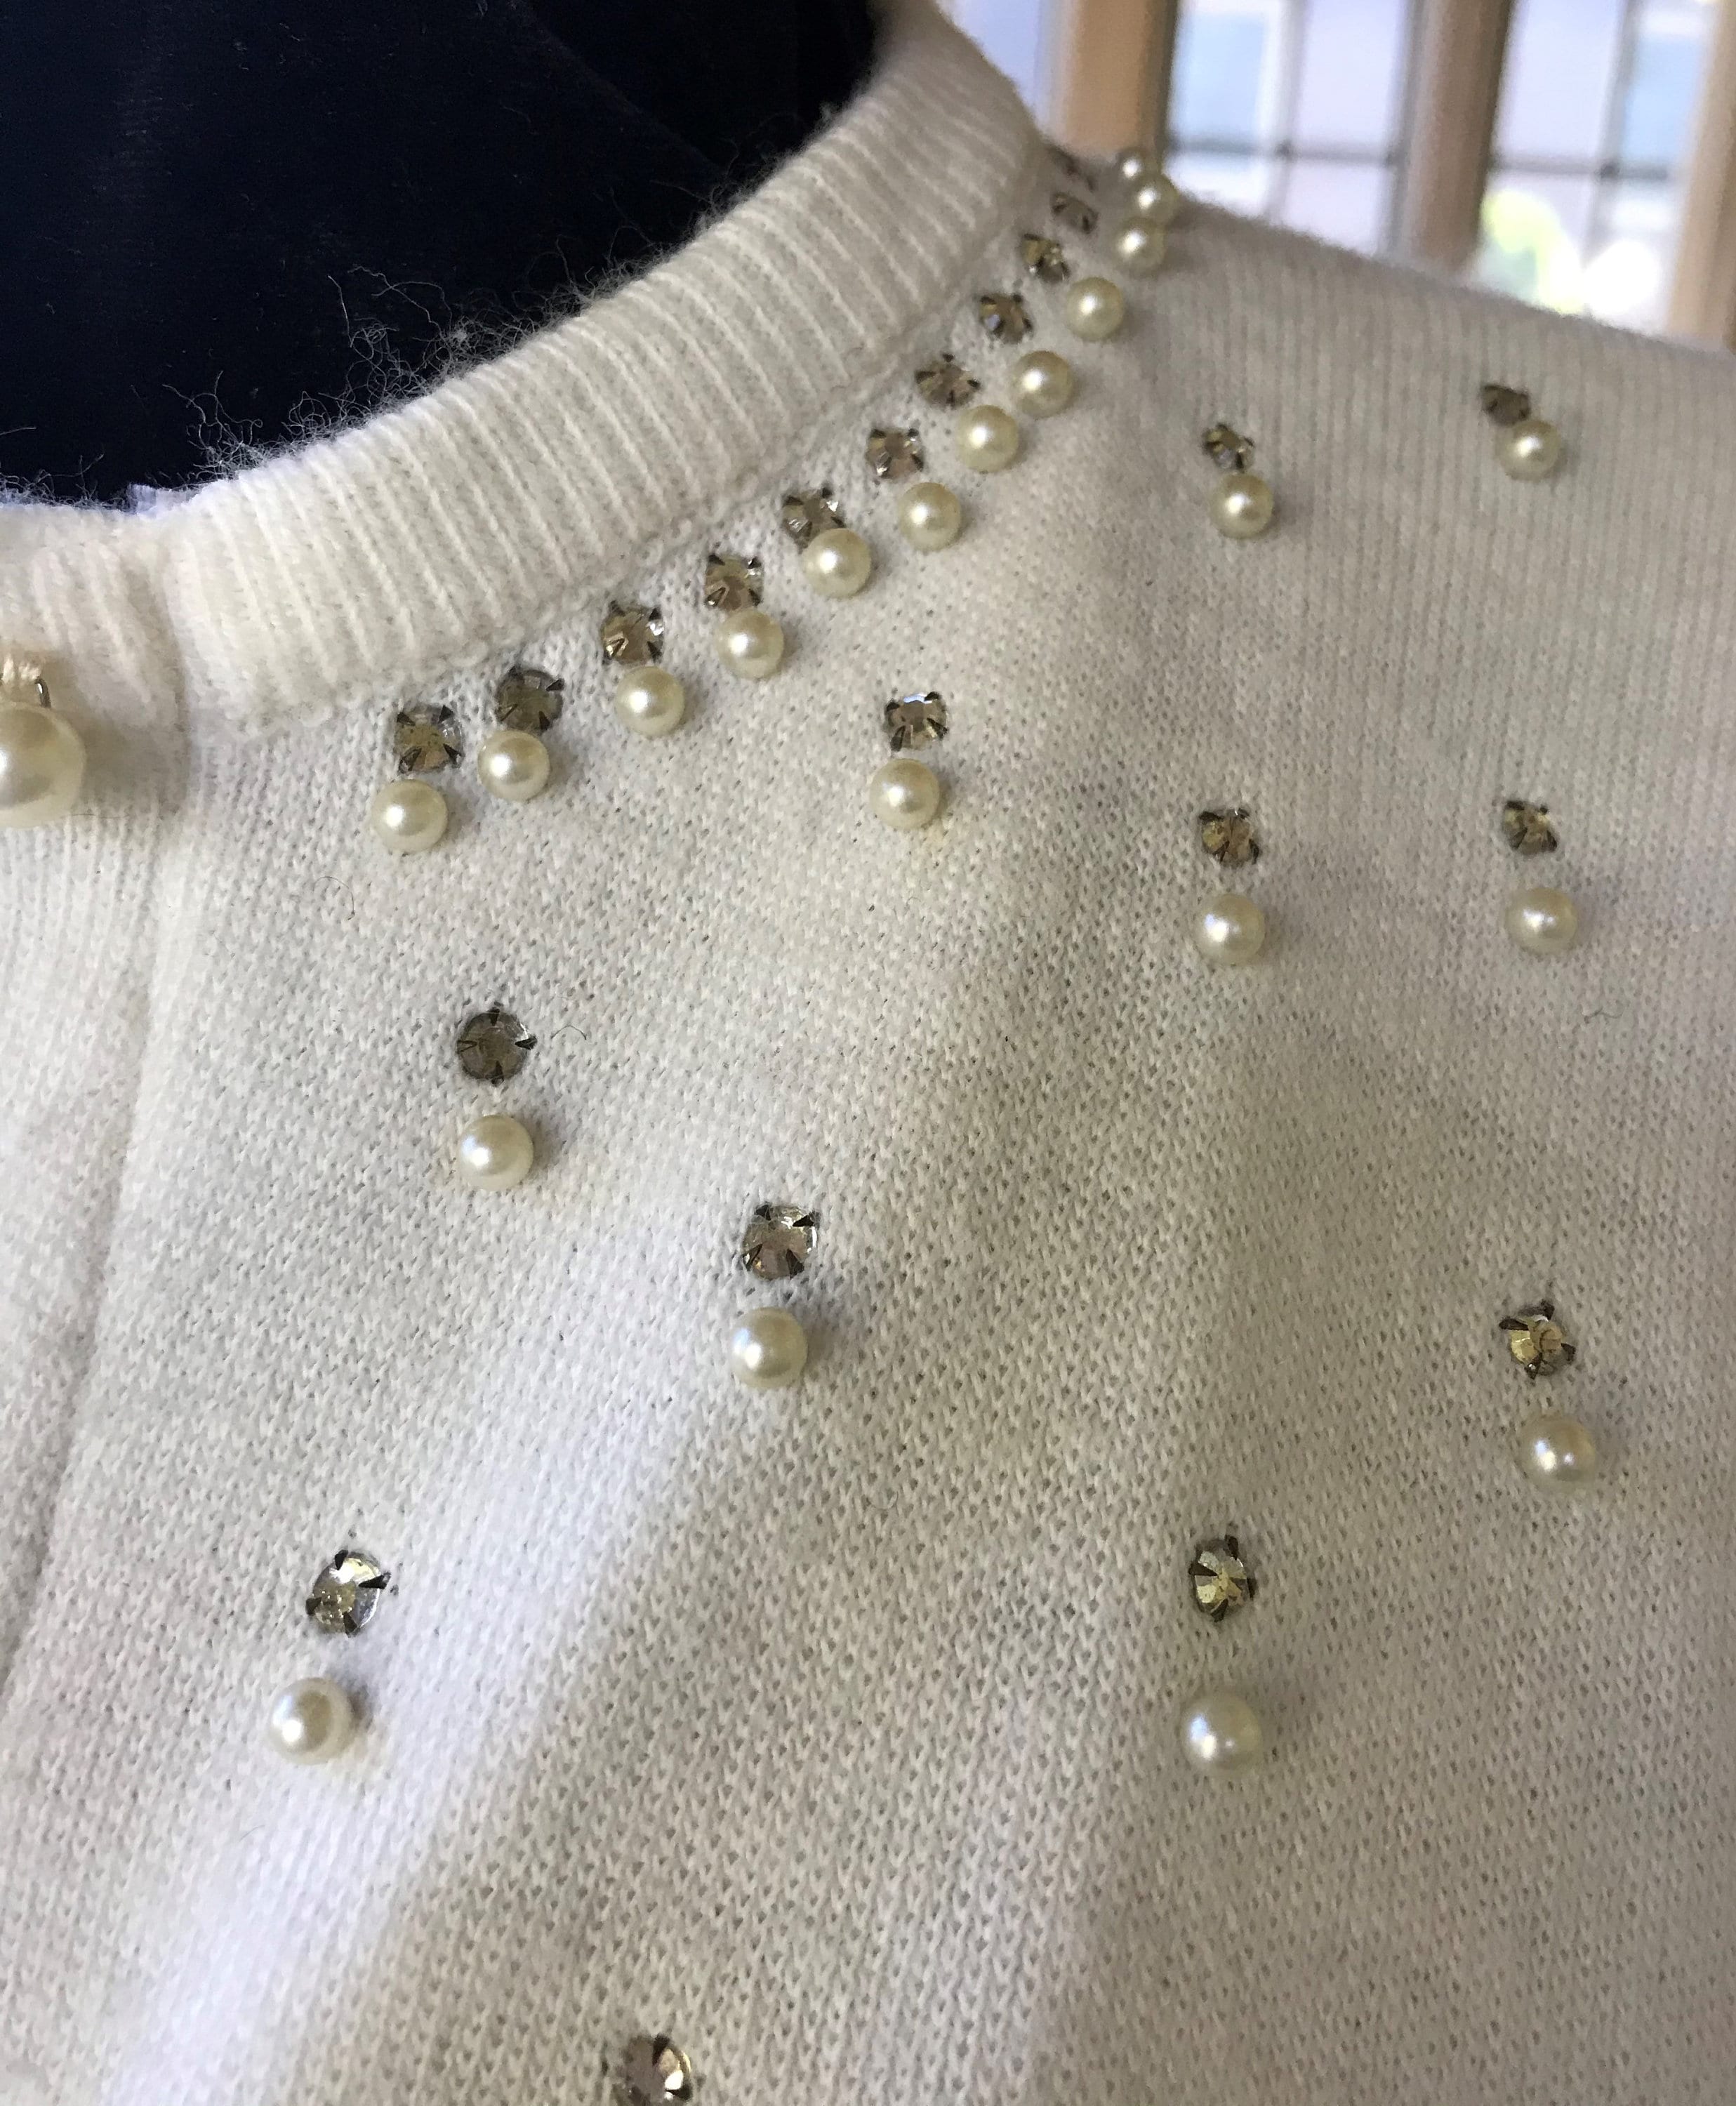 Vintage White Storyk Orlon Cardigan Lined Sweater With Pearls | Etsy